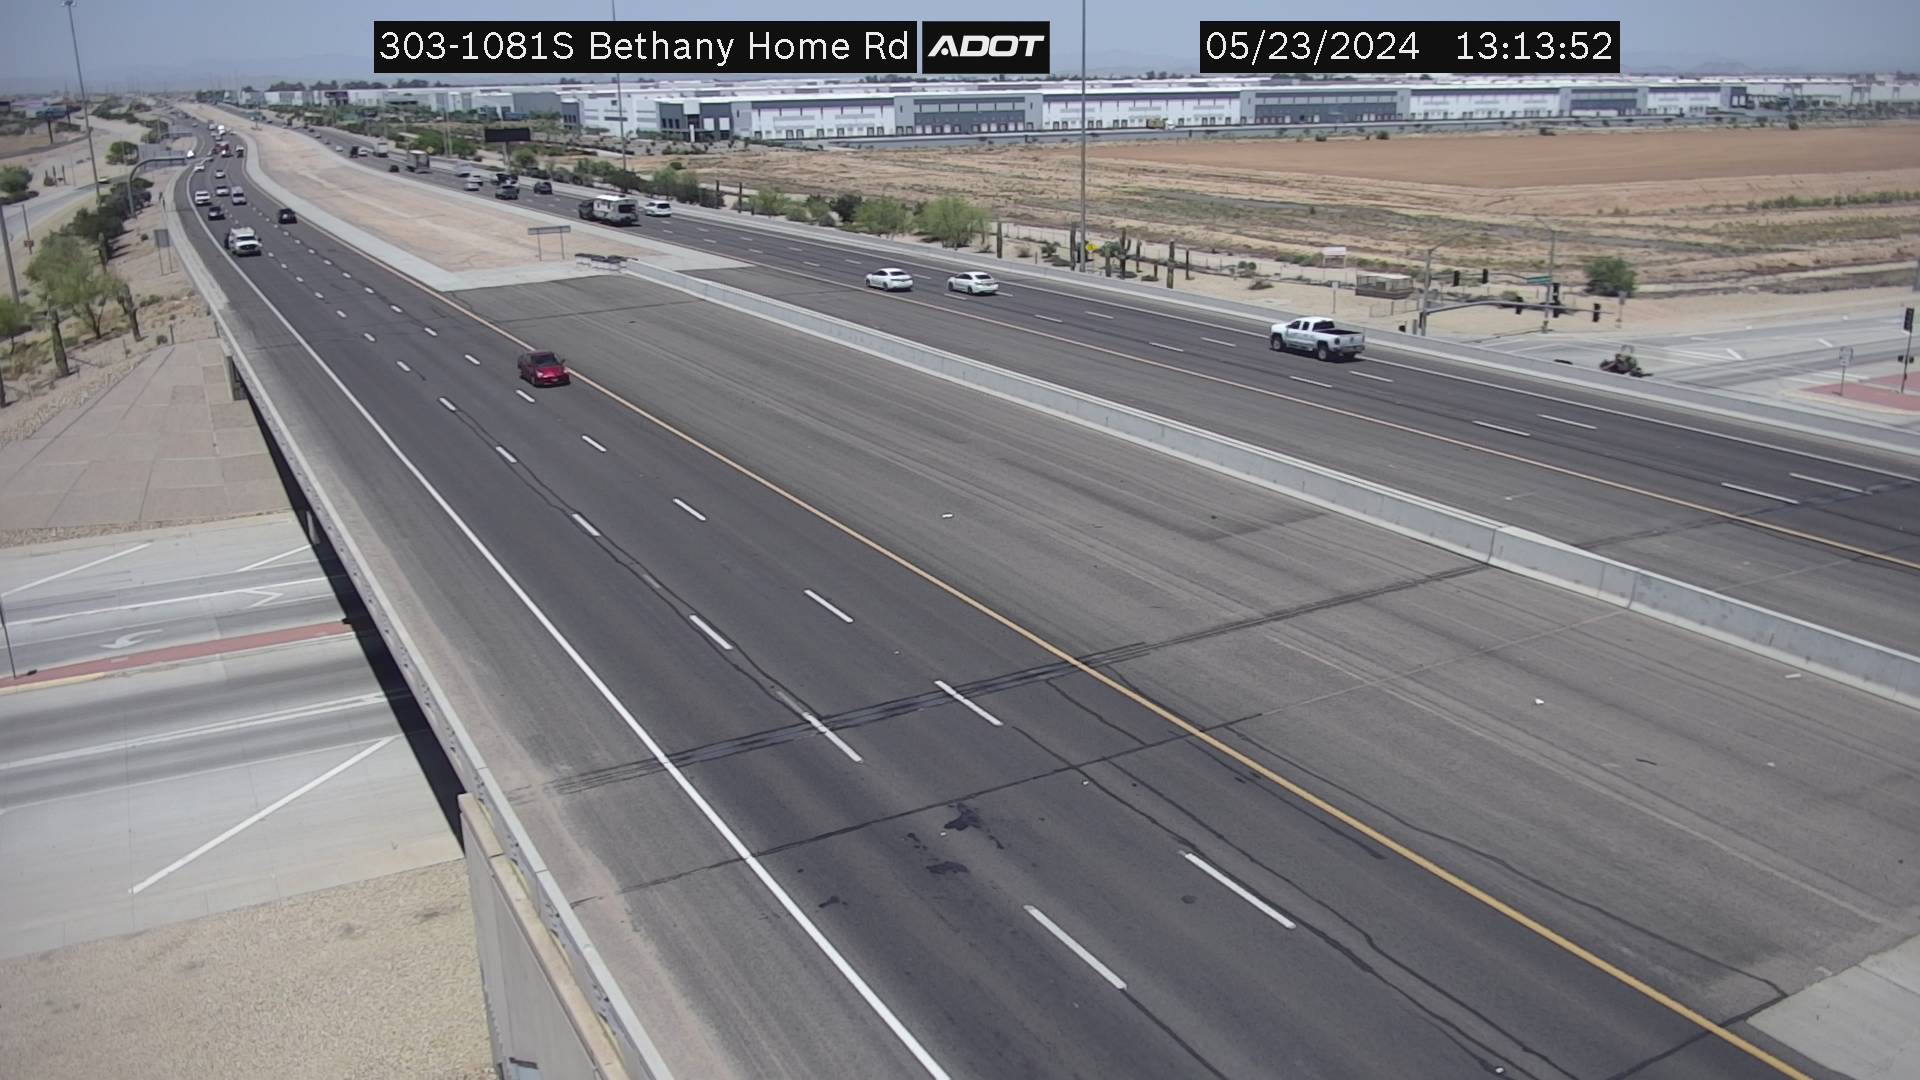 Traffic Cam L-303 SB 108.14 @BETHANY HOME -  Southbound